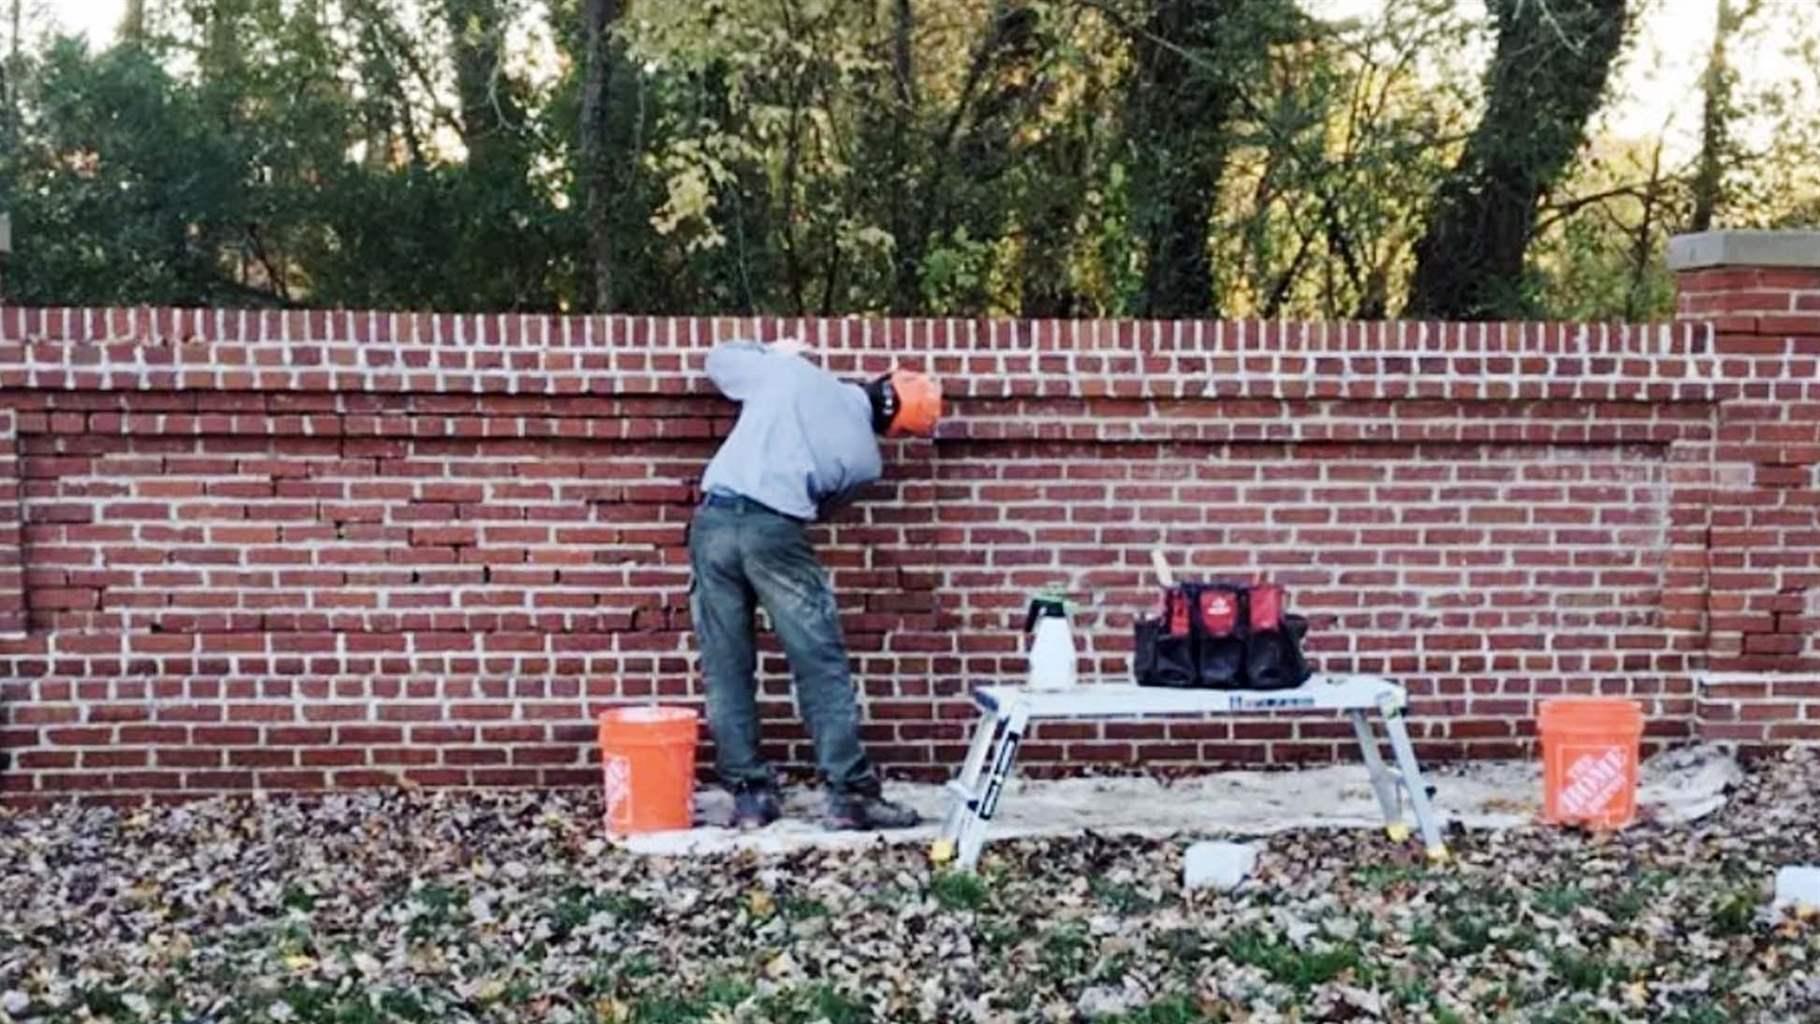 The Great American Outdoors Act has provided the National Park Service with the funding to carry out often complex repairs through the development of a new program called Maintenance Action Teams, which are regional teams of masons and other craftsmen who work at sites such as Poplar Grove National Cemetery in the Petersburg National Battlefield in Virginia. 